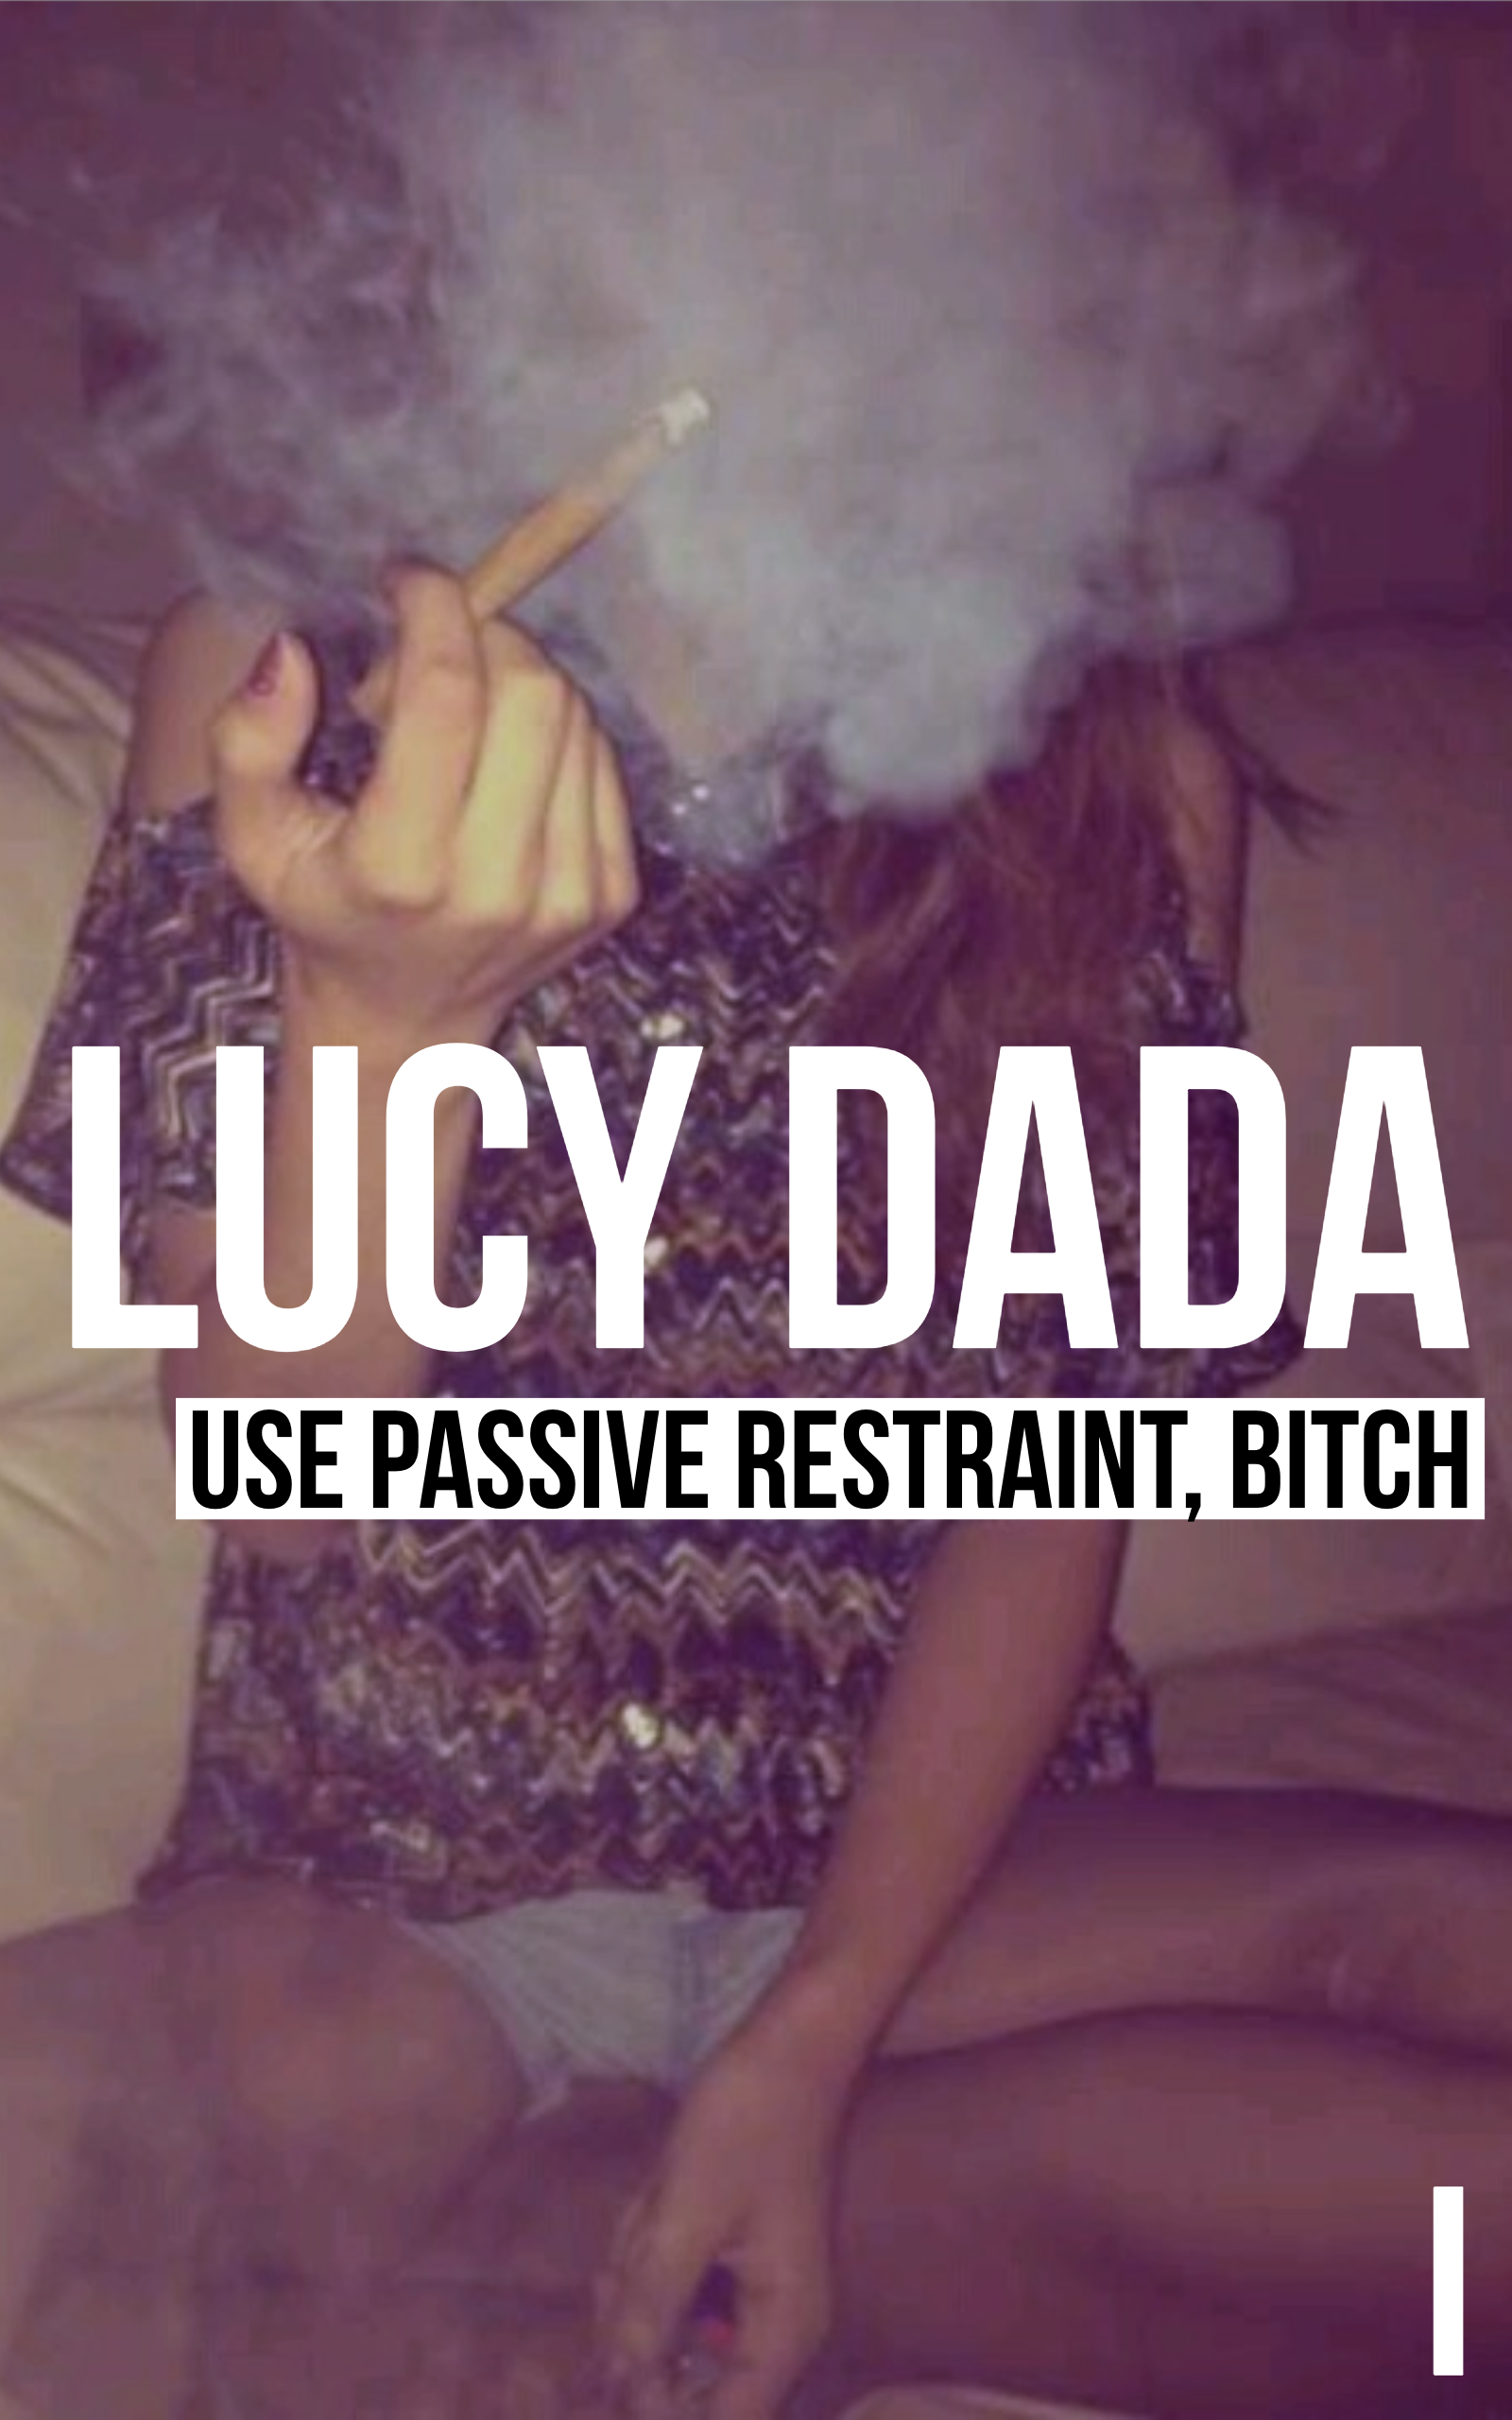 FREE: Use Passive Restraint, B*tch by Lucy Dada